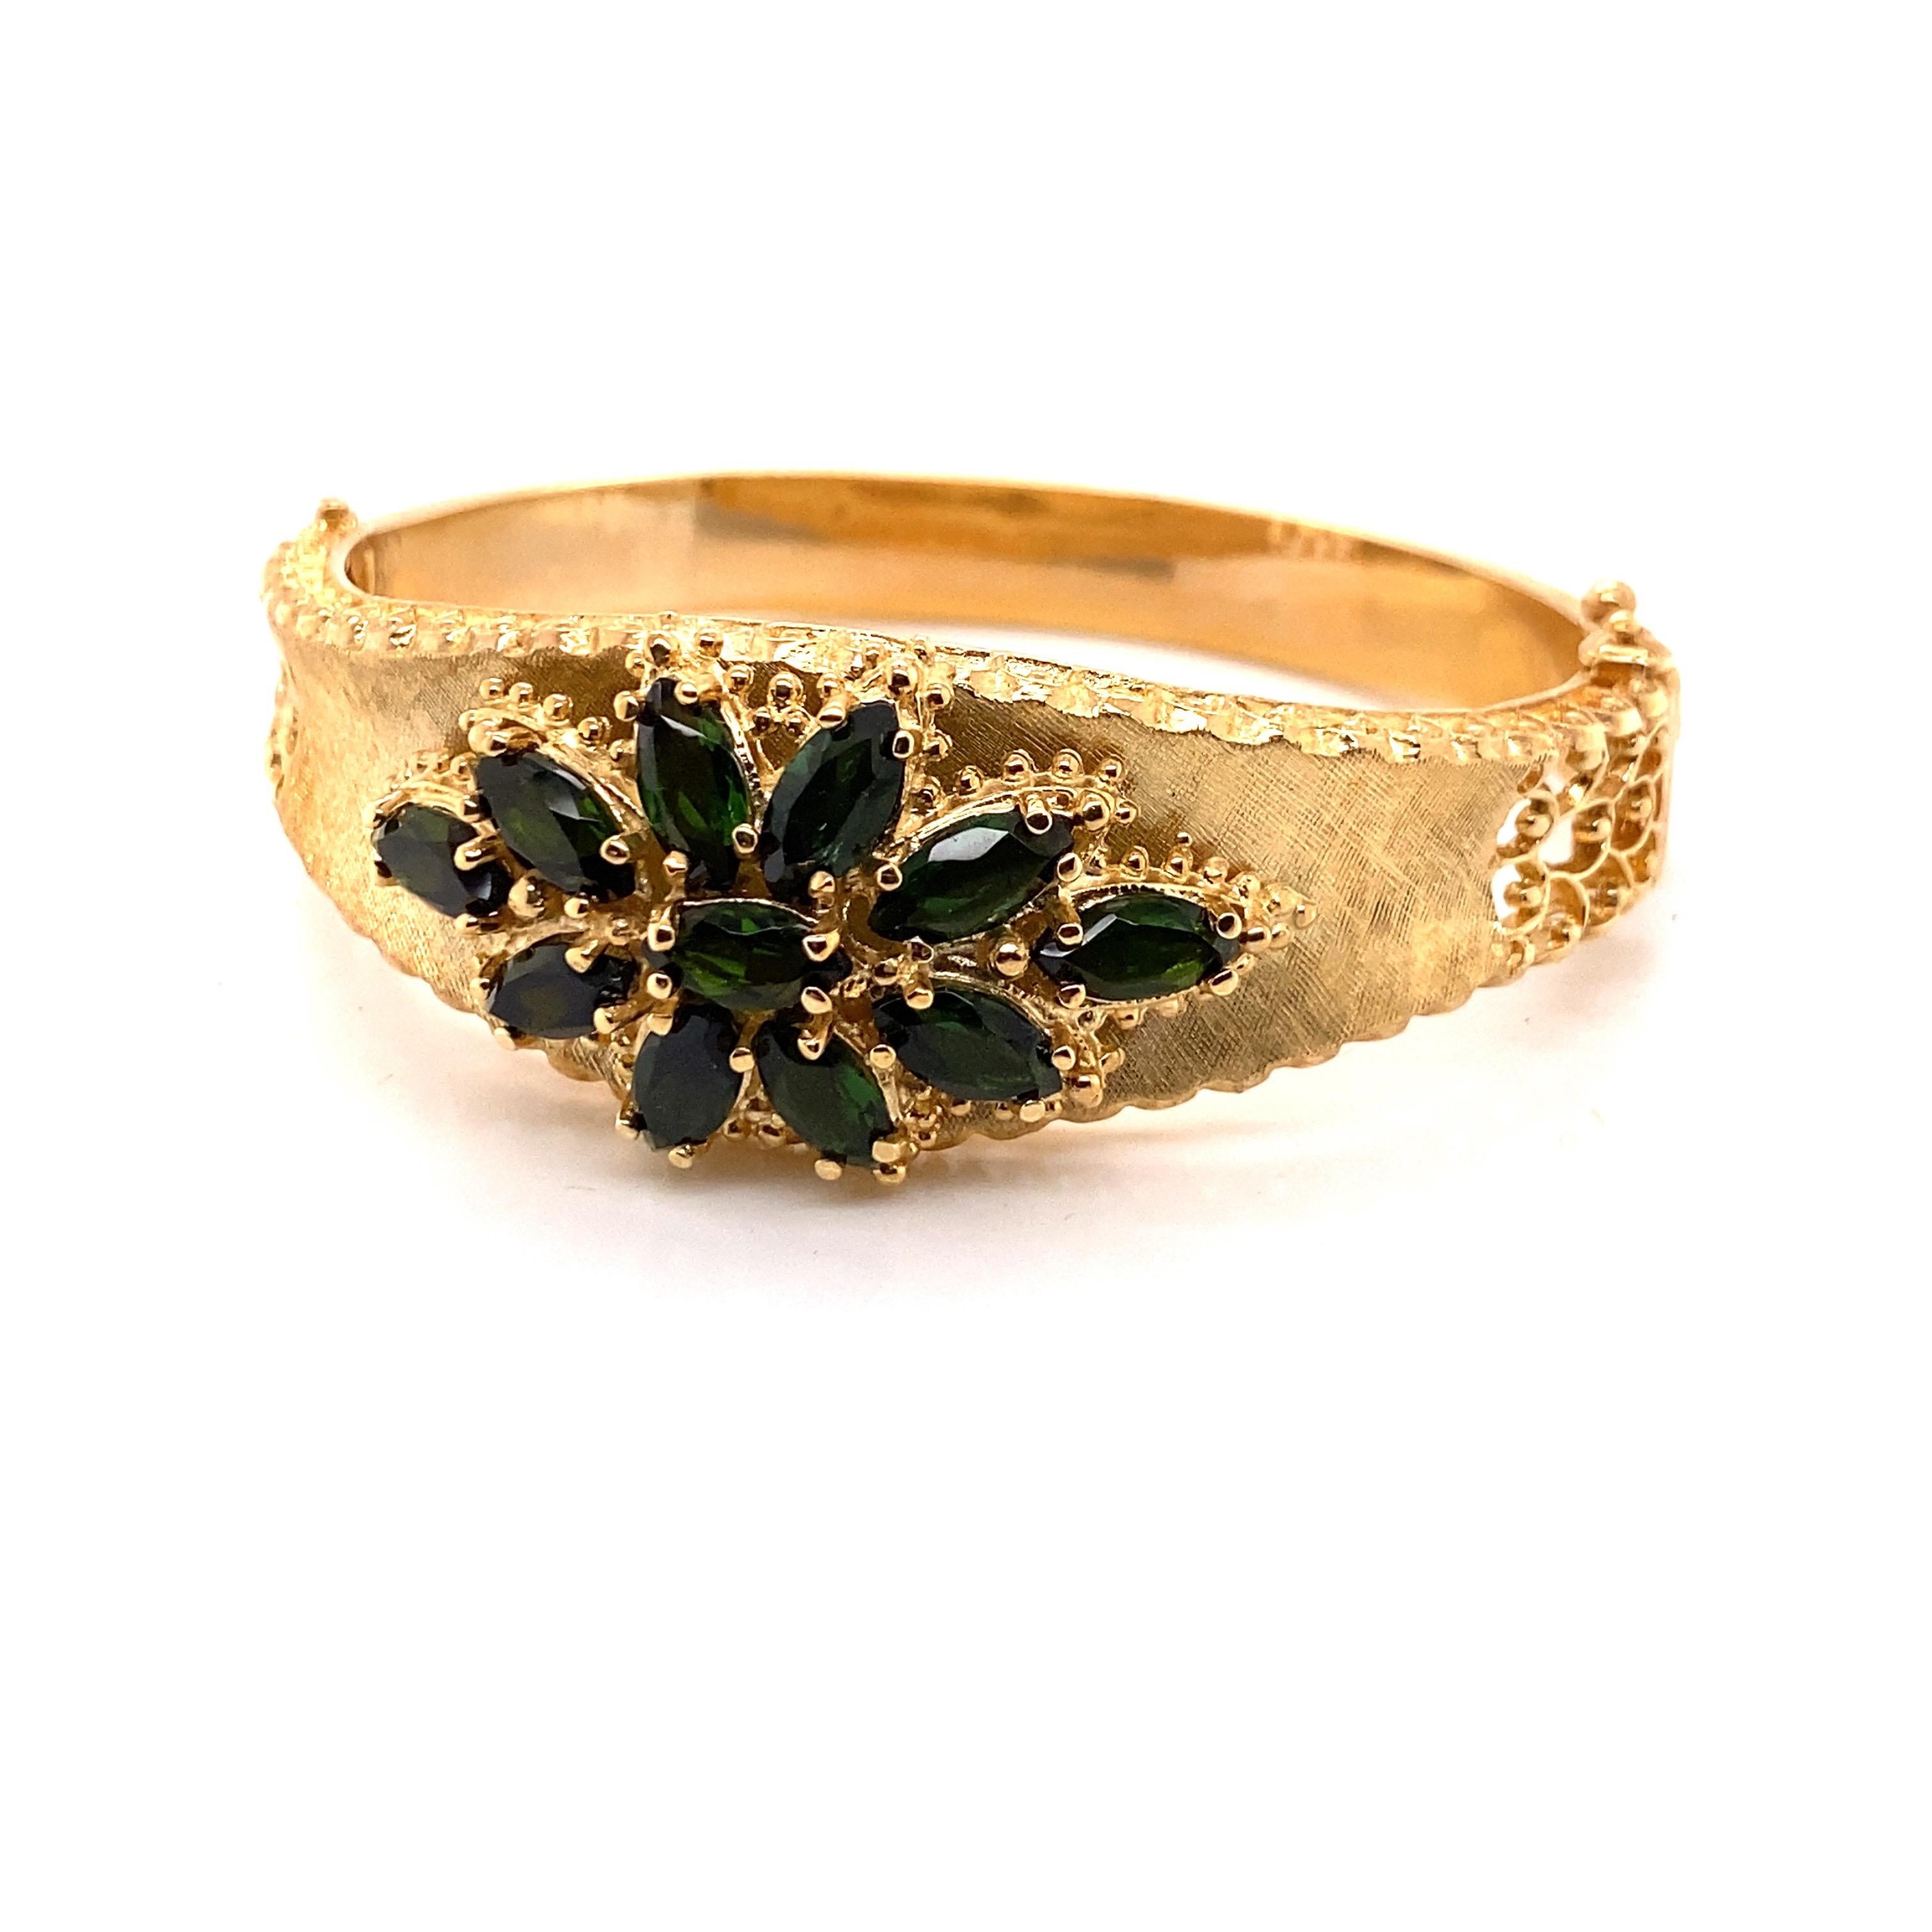 Vintage 14K Yellow Gold Bangle Bracelet with Green Tourmaline - There are 11 marquise shape green tourmalines set in a flower design. The gold bangle has a florentine finish with some filigree work on the side. The width on the top is 21 mm and